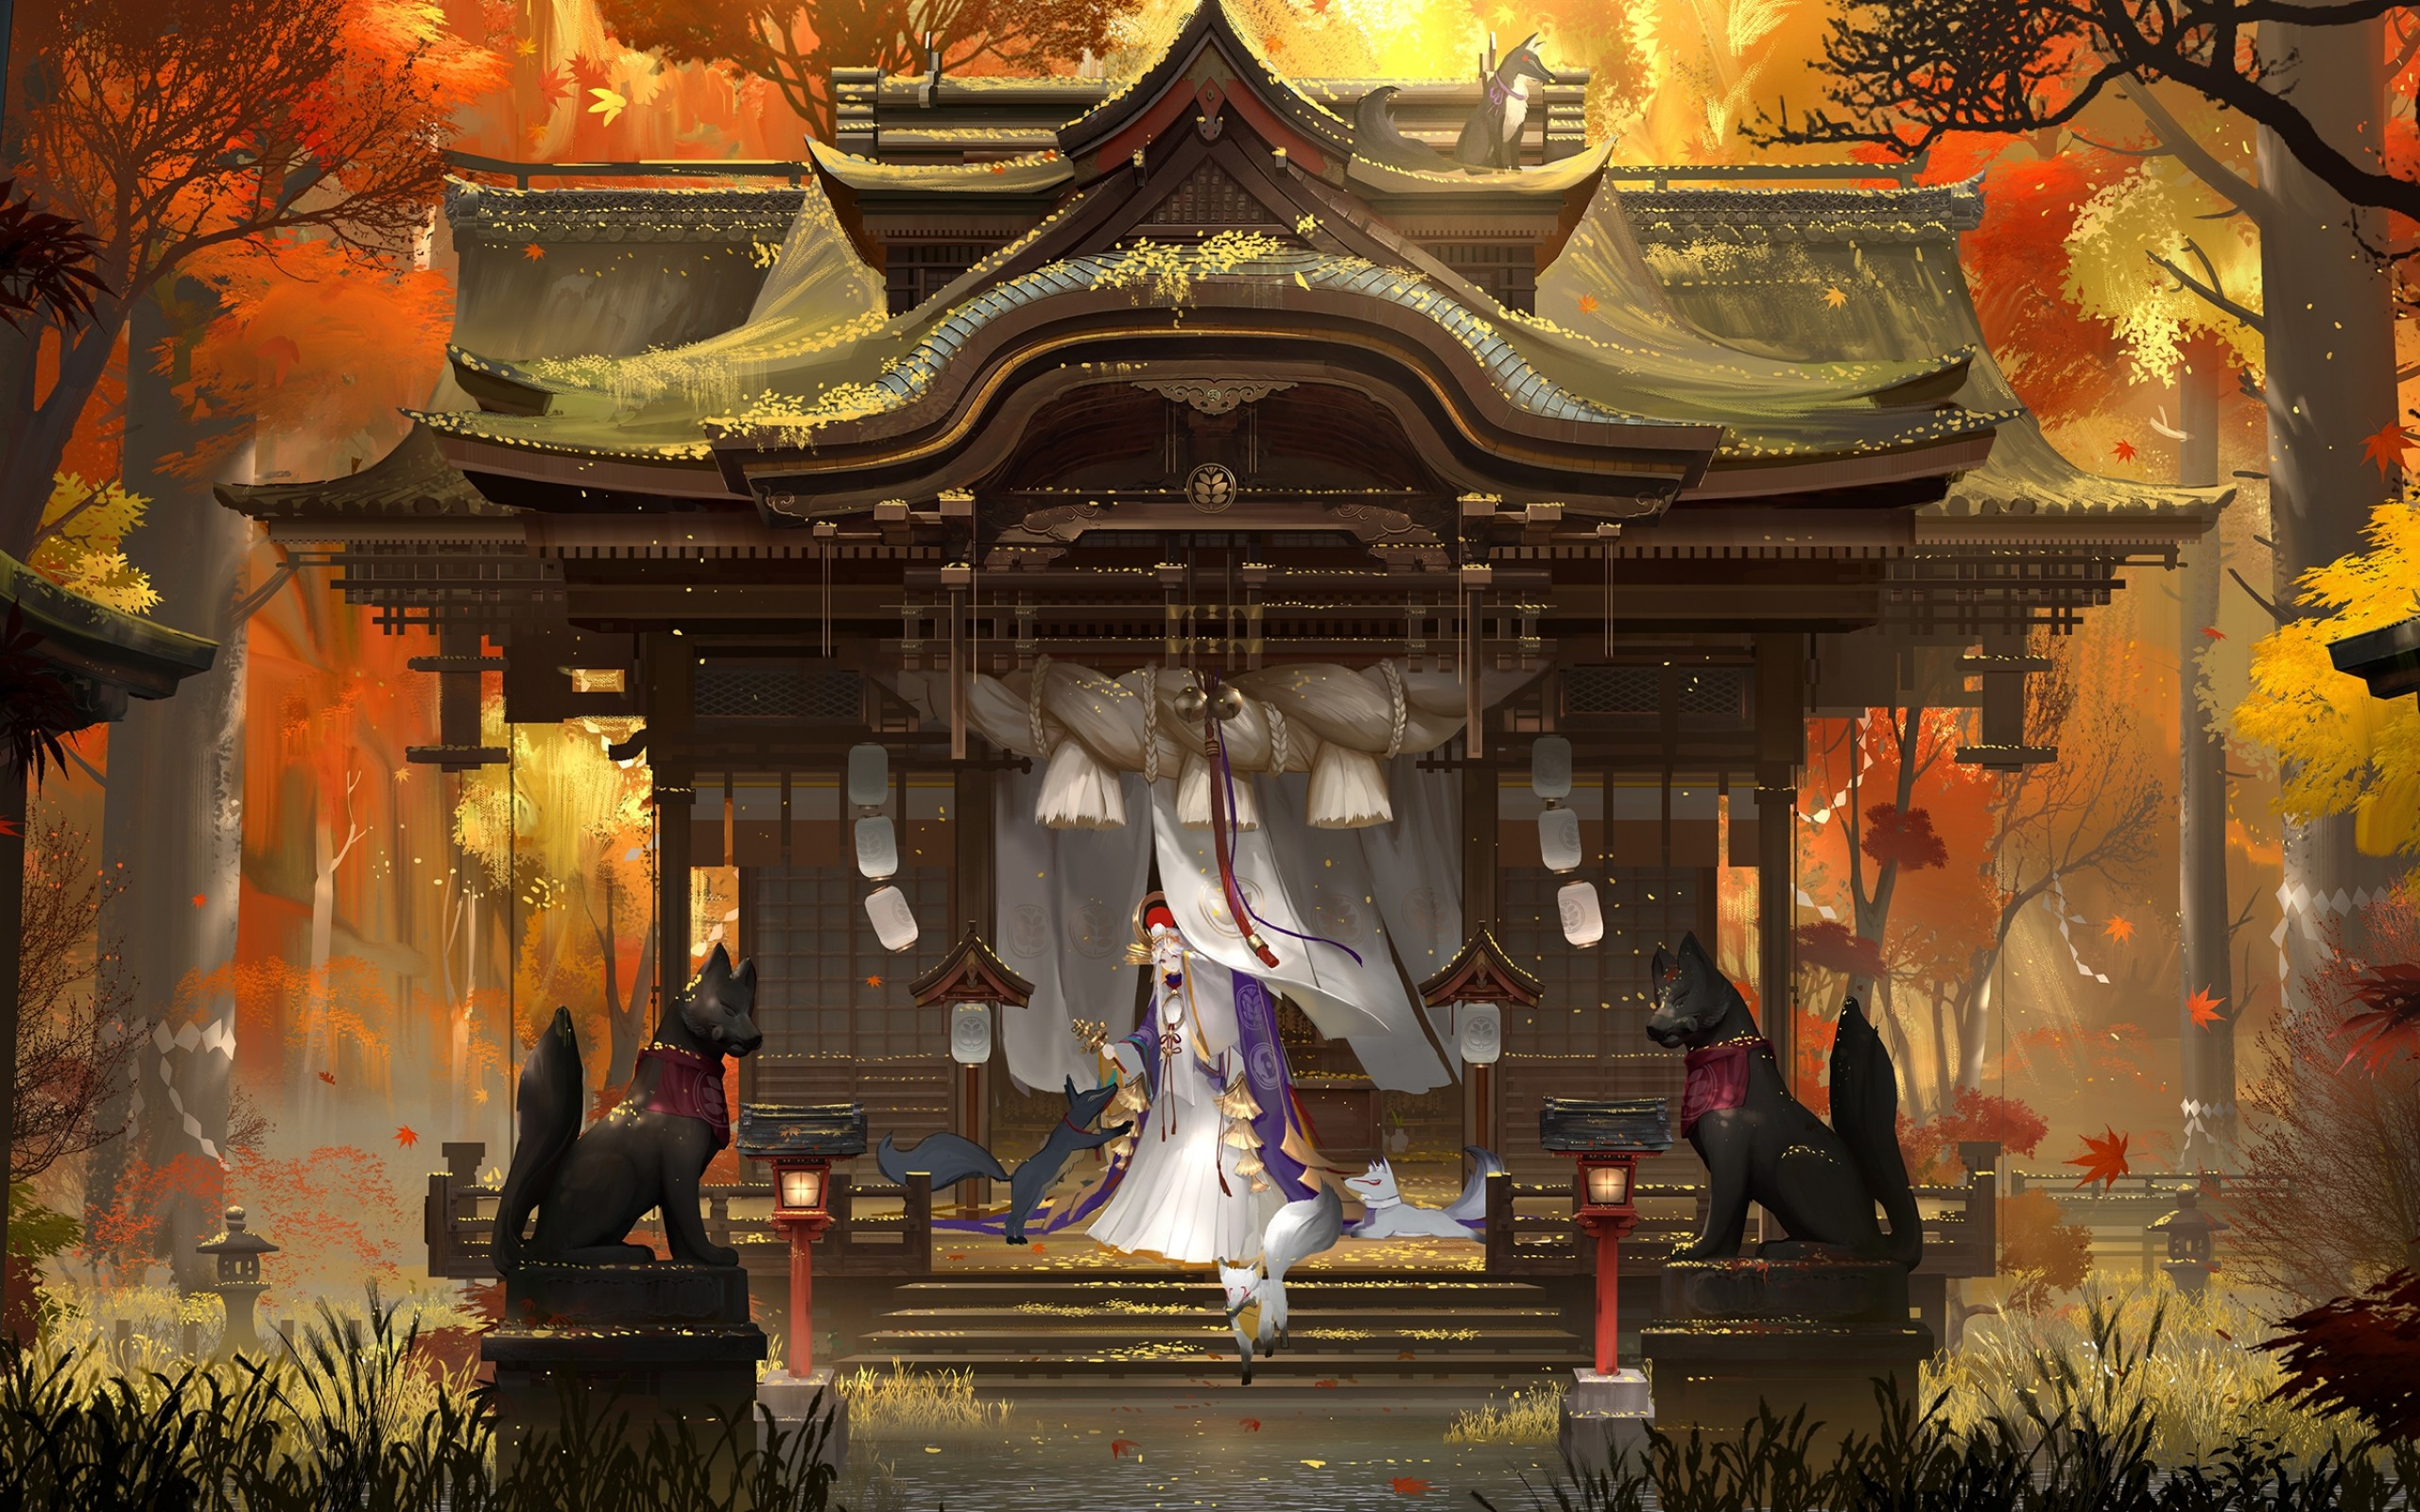 Download 2560x1600 Anime Landscape, Creatures, Shrine, Forest, Statue, Miko, Japanese Clothes, Autumn Wallpaper for MacBook Pro 13 inch